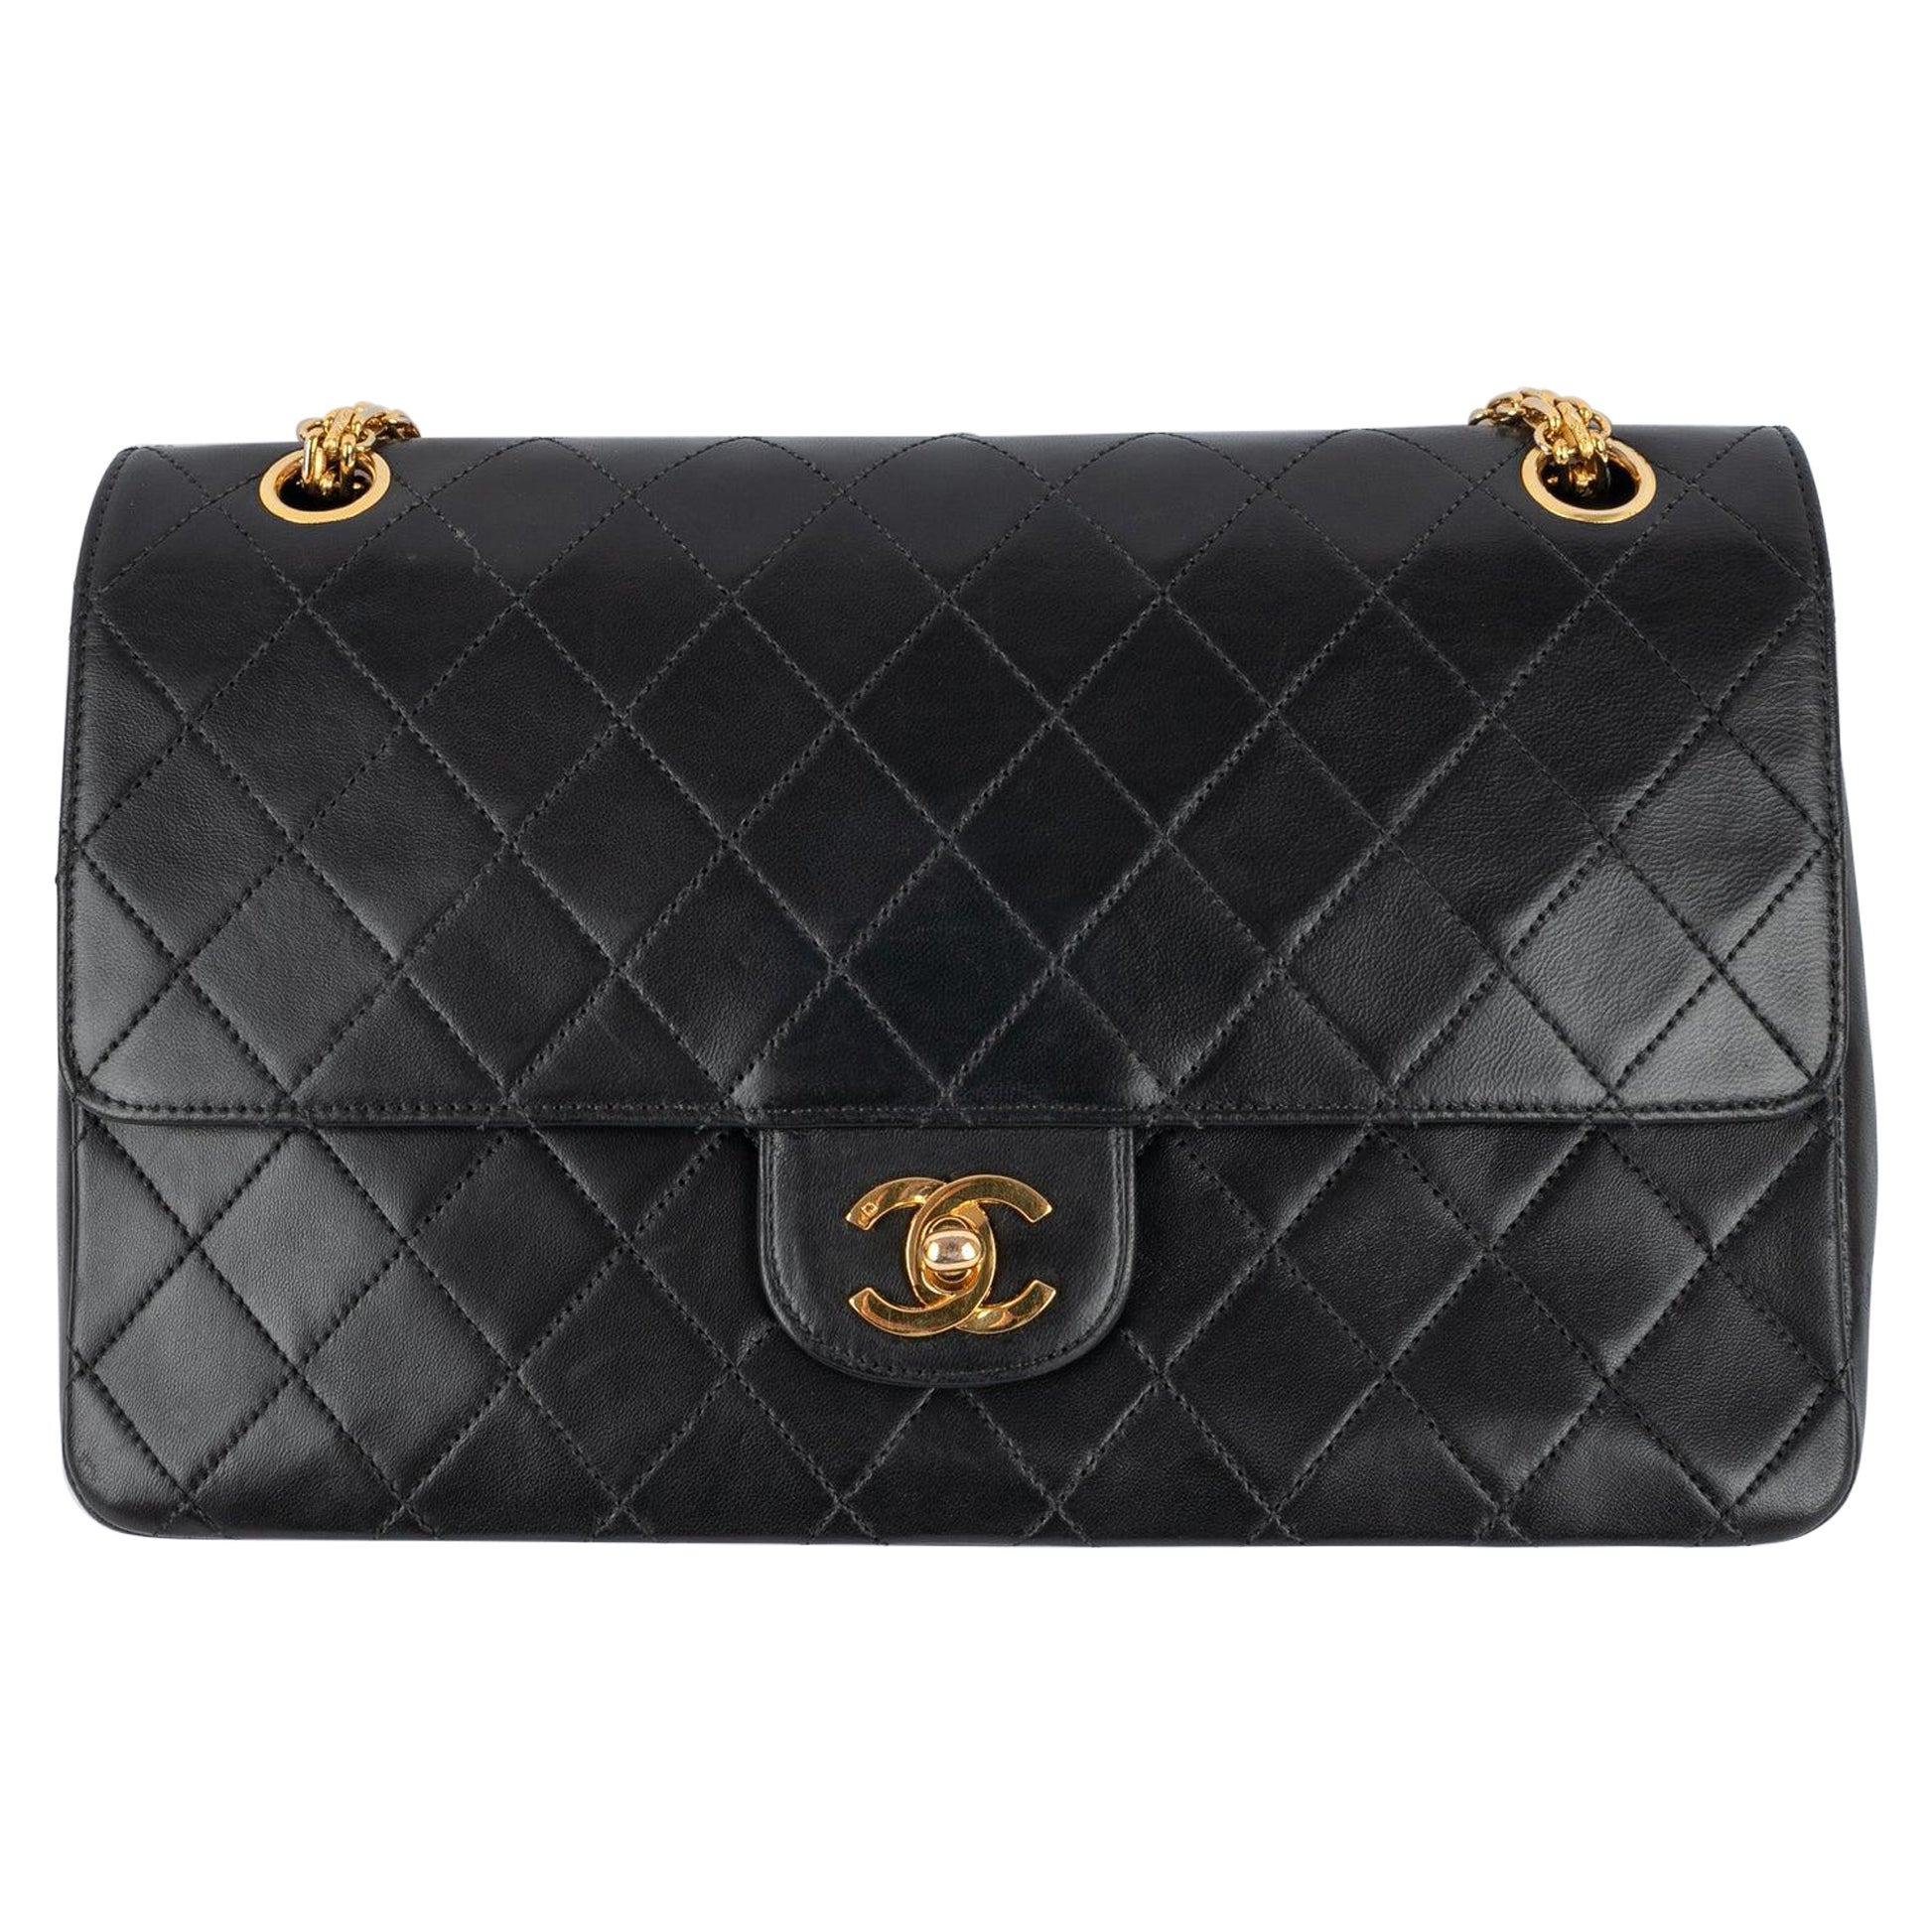 Chanel Quilted Black Lambskin Timeless Bag, 1997/1999 For Sale